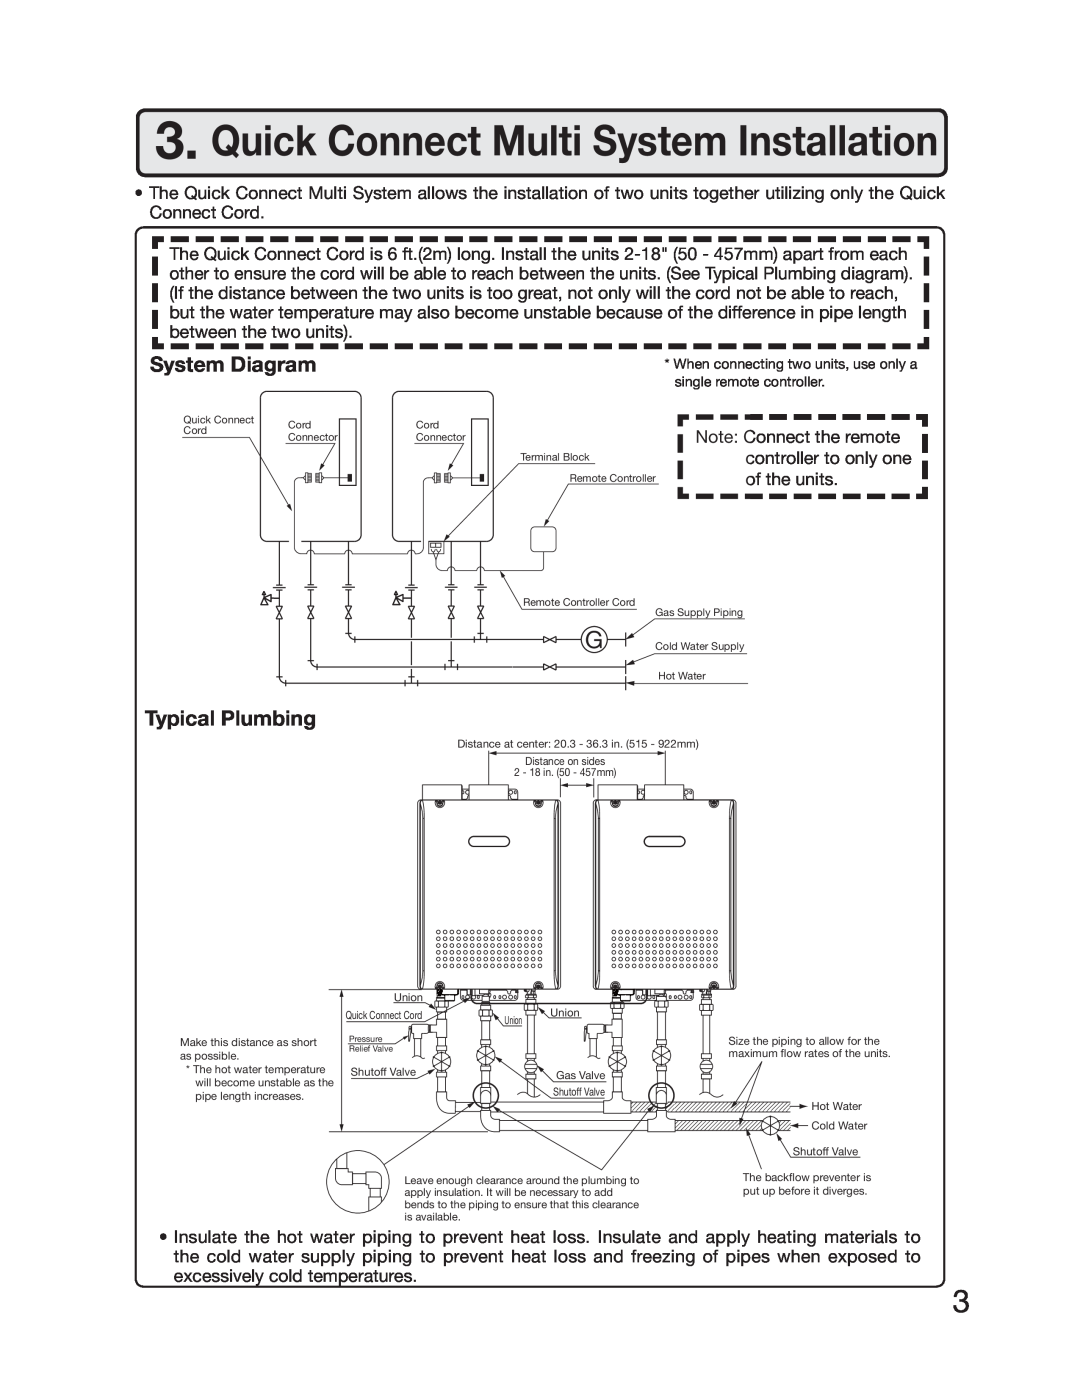 Electrolux 5995615357 installation manual Quick Connect Multi System Installation, System Diagram, Typical Plumbing 